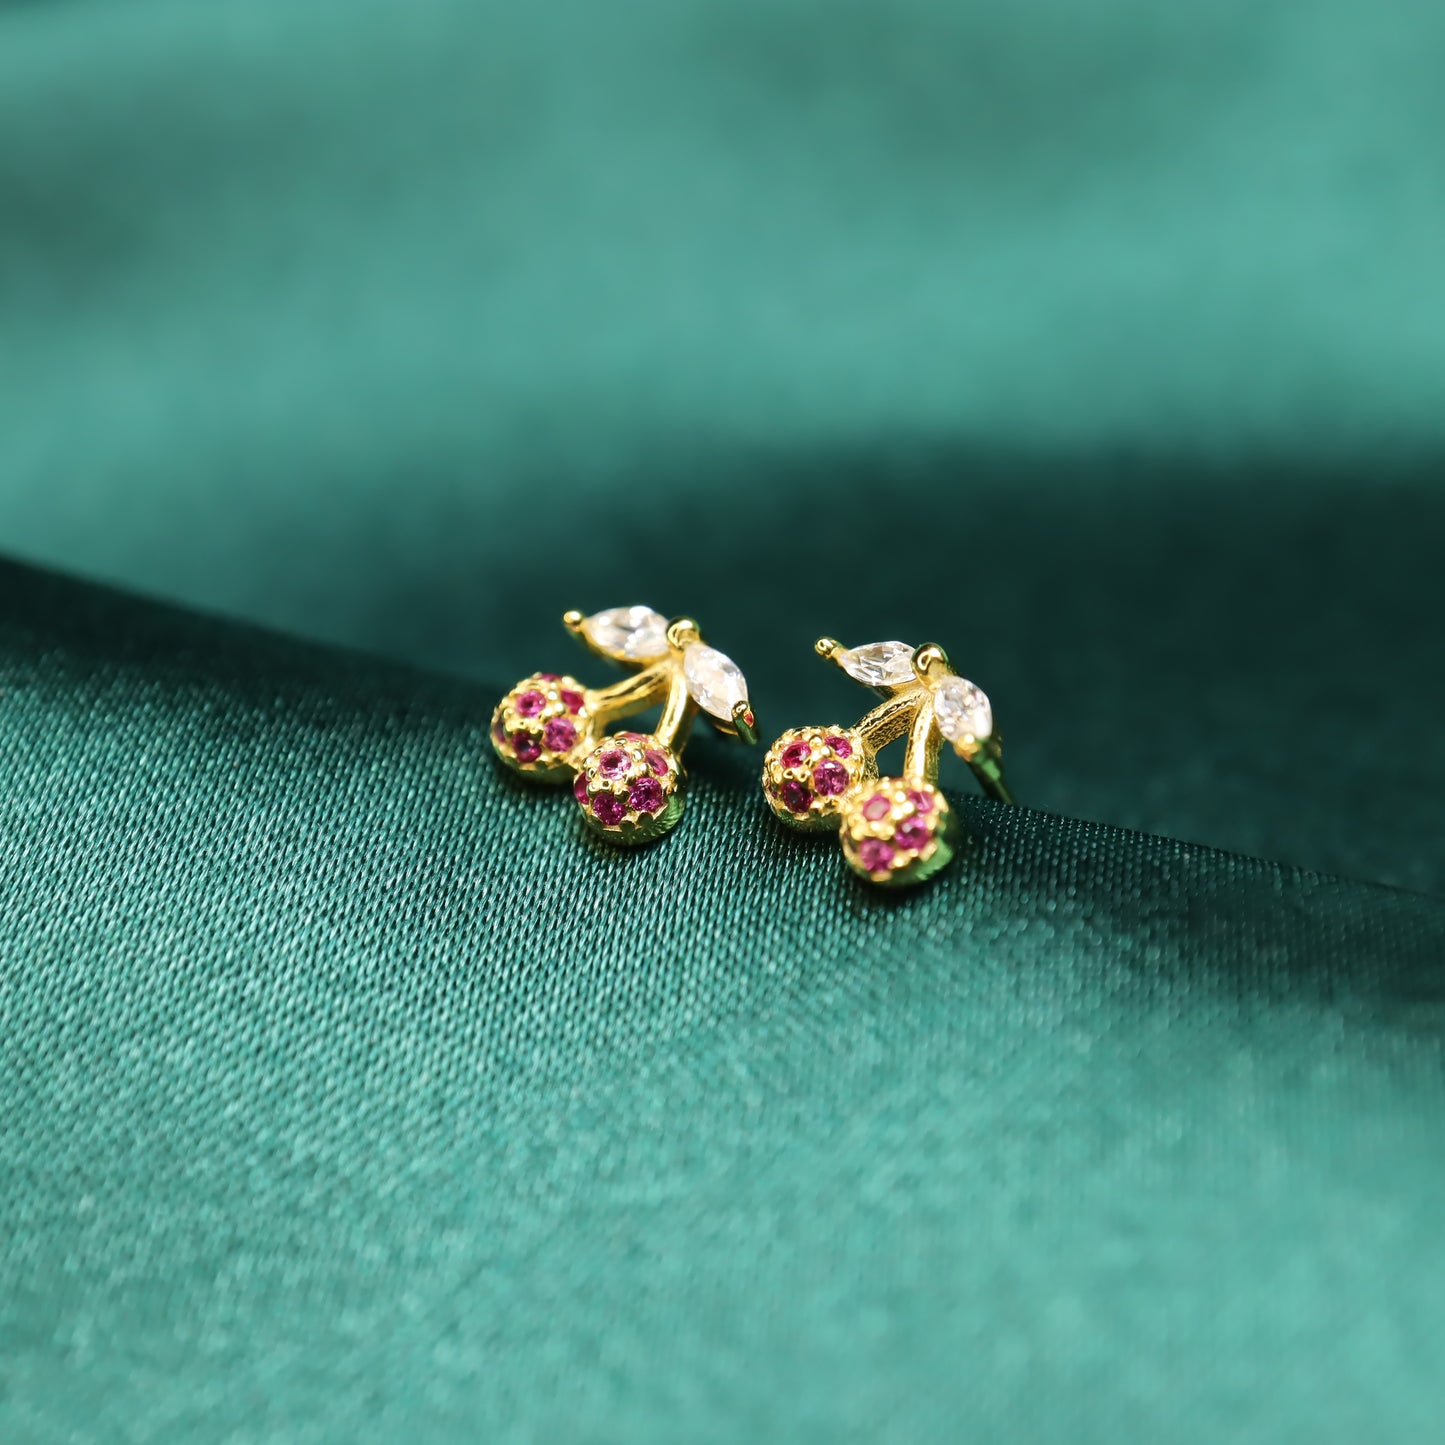 Cherry S925 Sterling Silver 14k Gold Plated & Zircon Stud Earrings (Color: Gold)